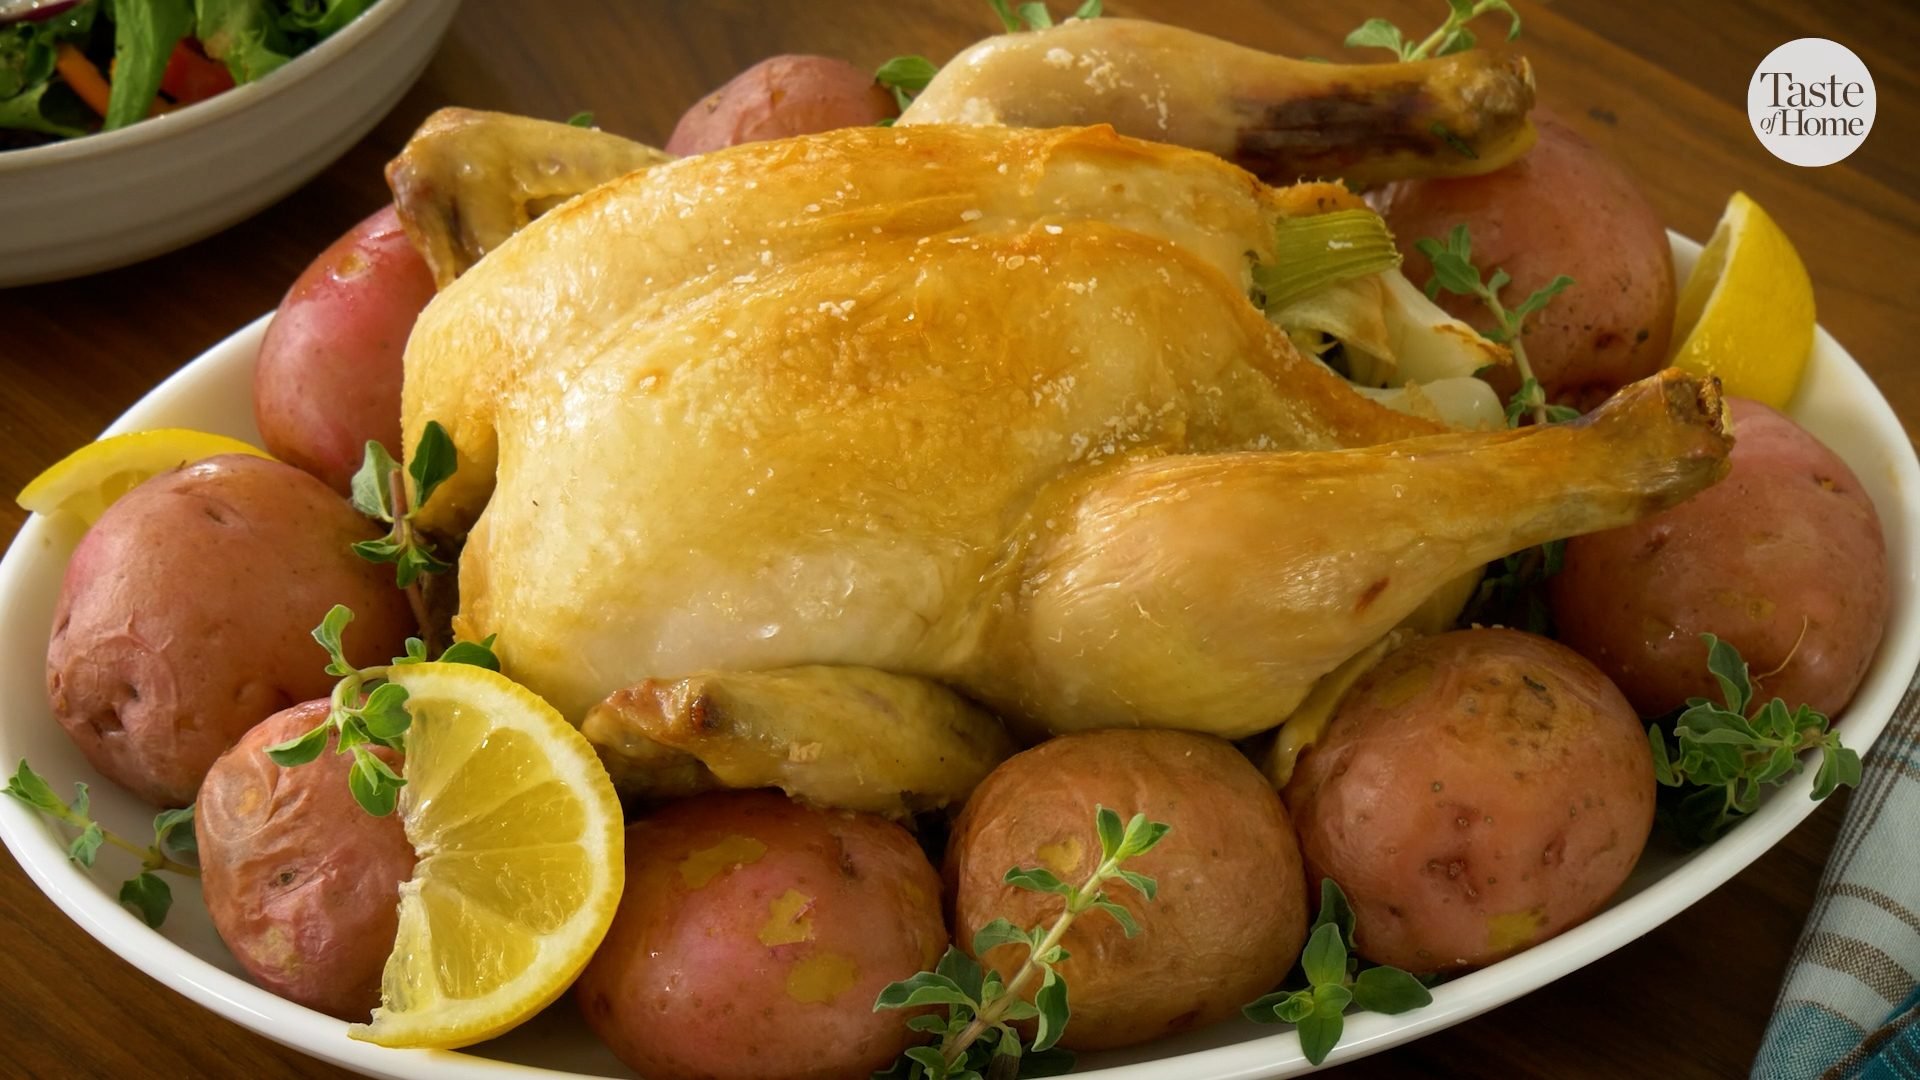 Make Dutch Oven Roasted Chicken for a Great Holiday Meal